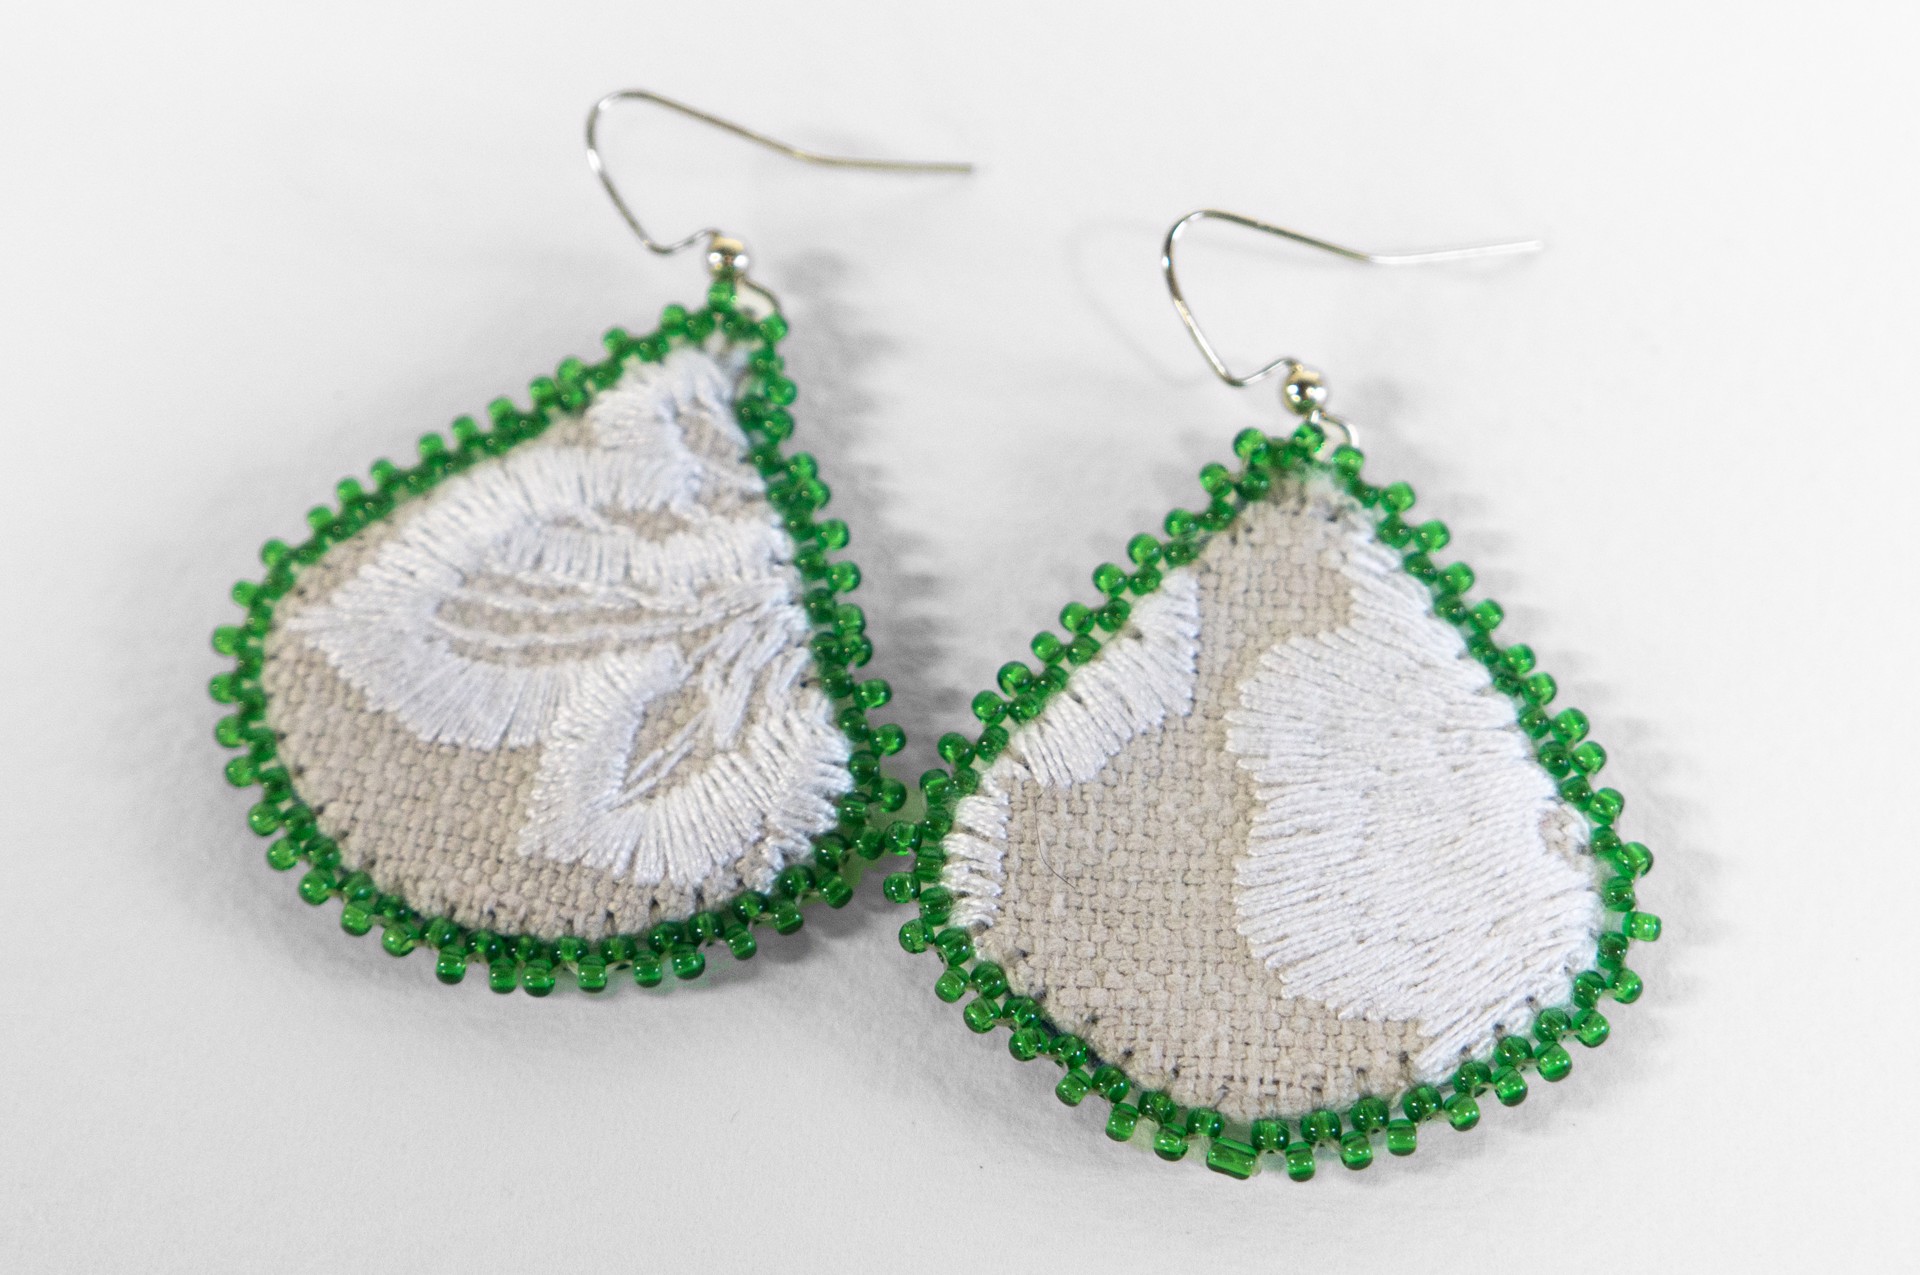 Green edge embroidered earrings by Hattie Lee